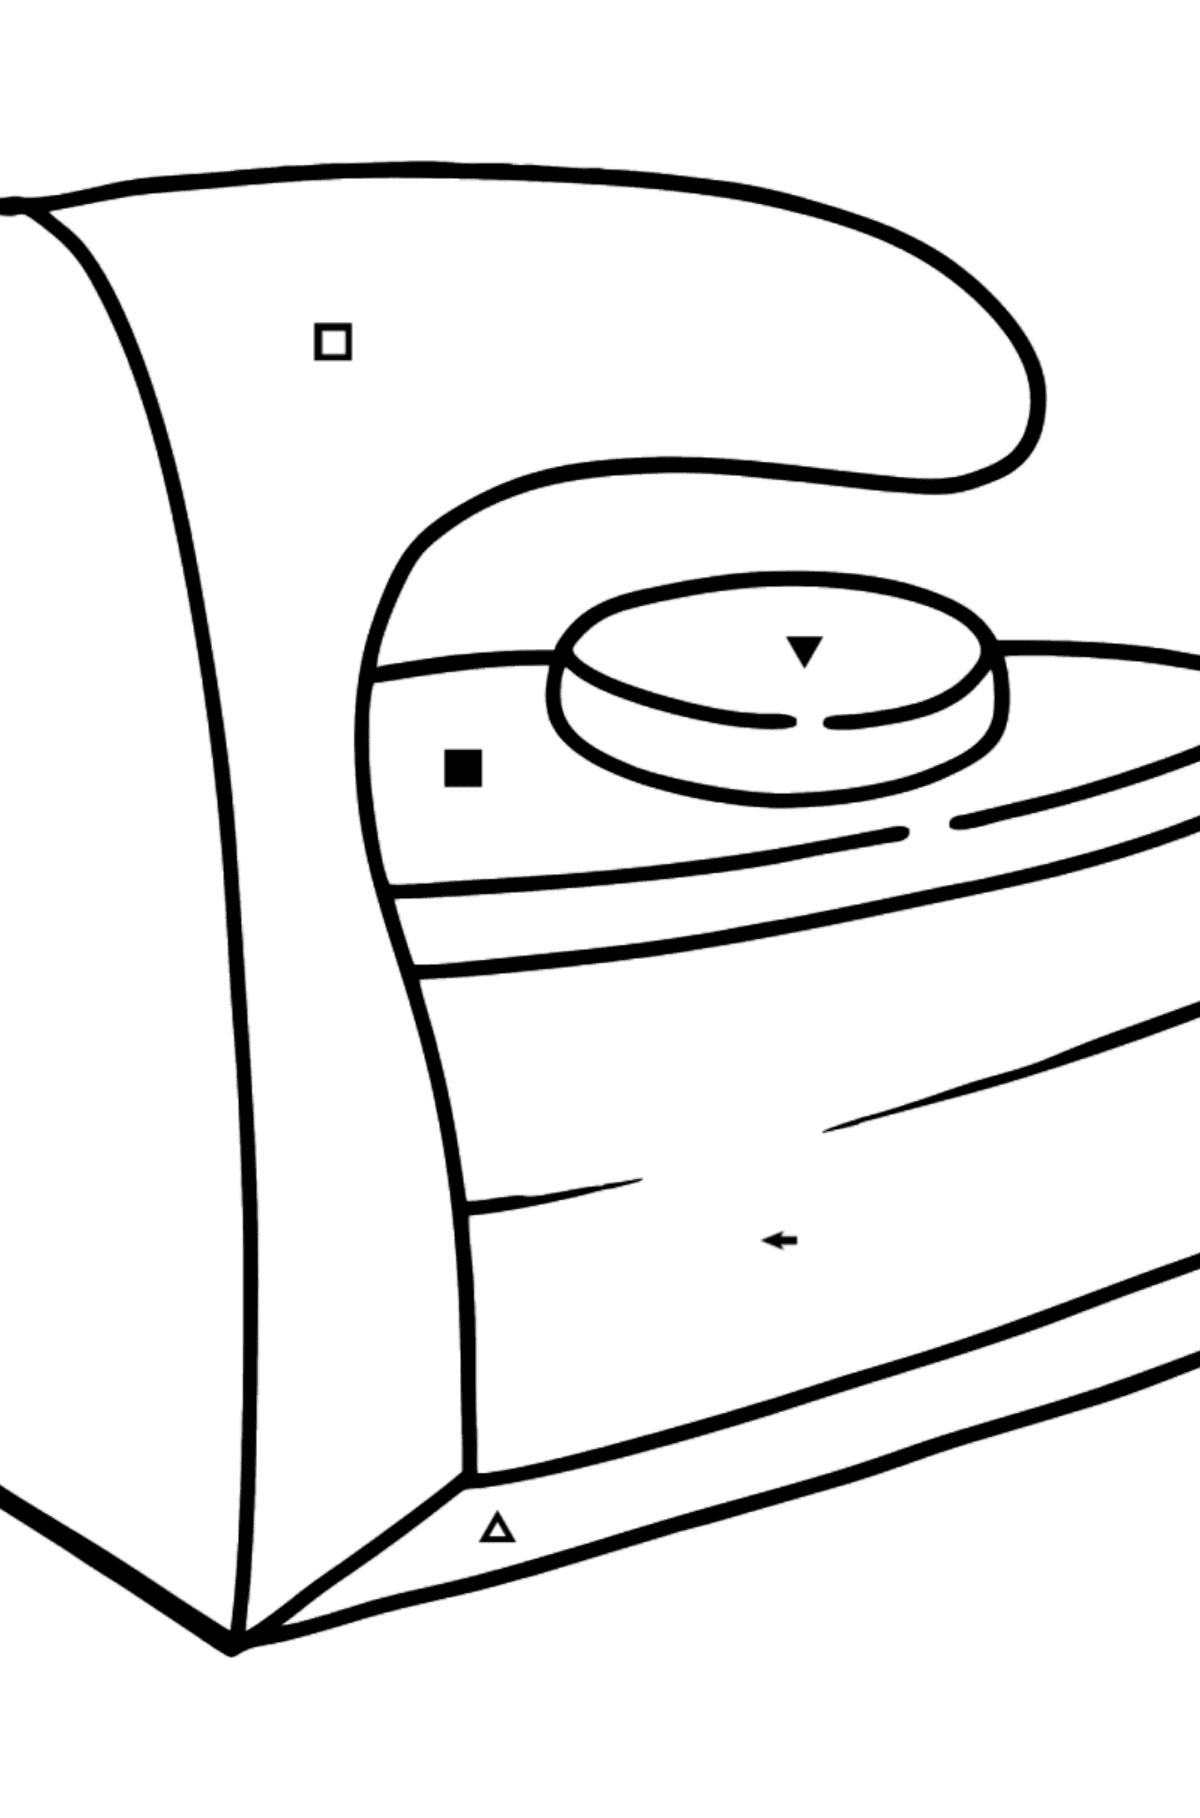 Iron for ironing coloring page - Coloring by Symbols for Kids